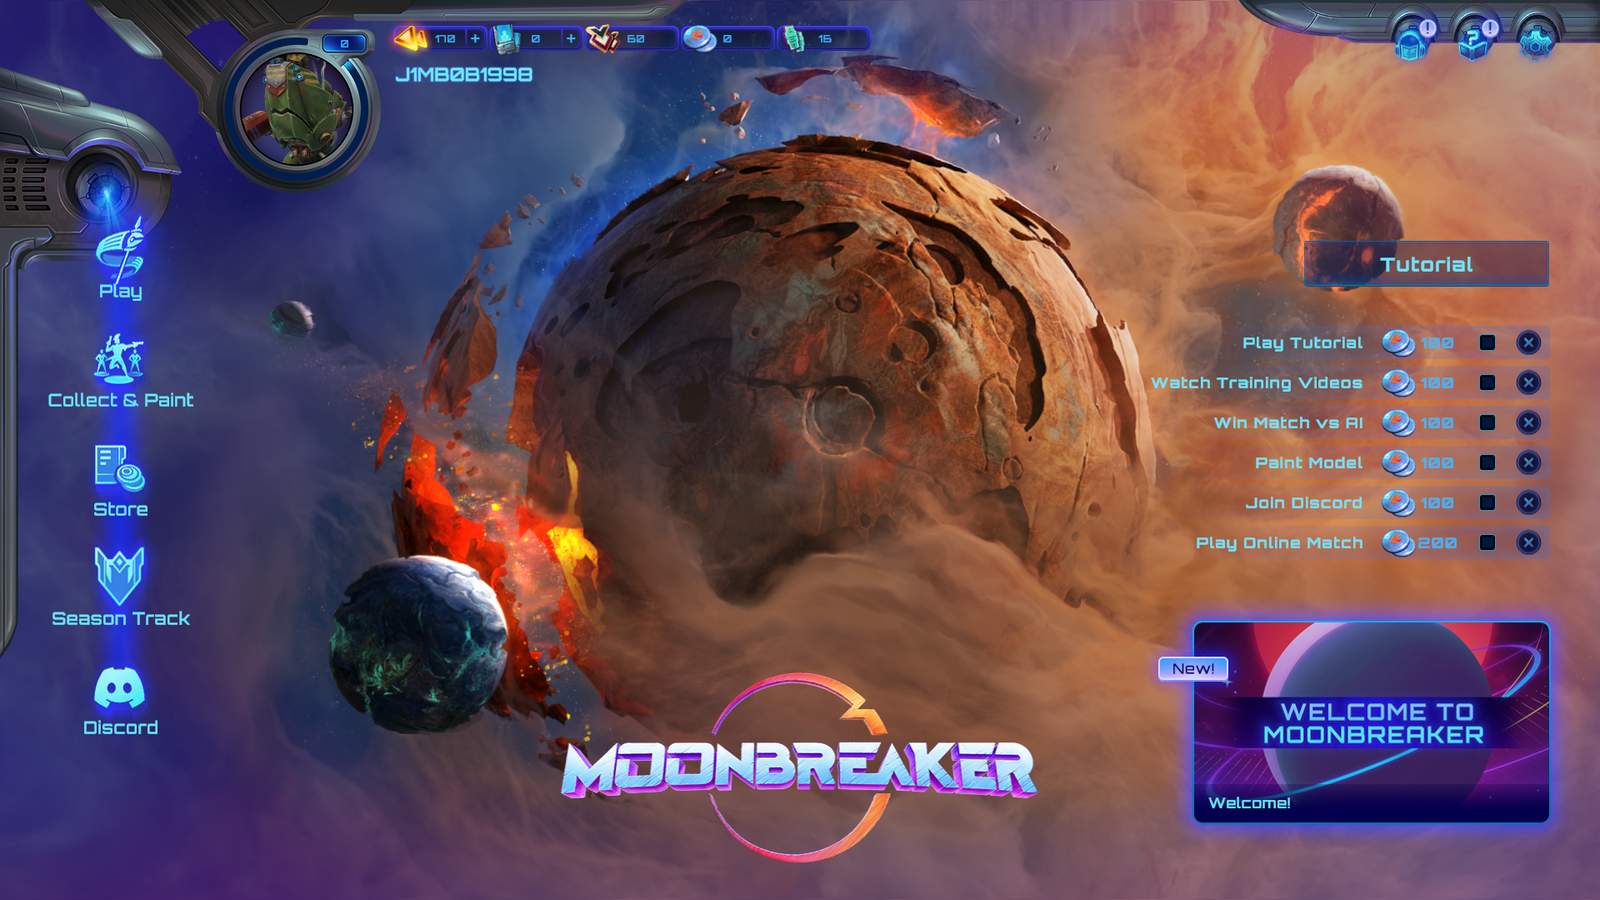 Is Moonbreaker pay to win?